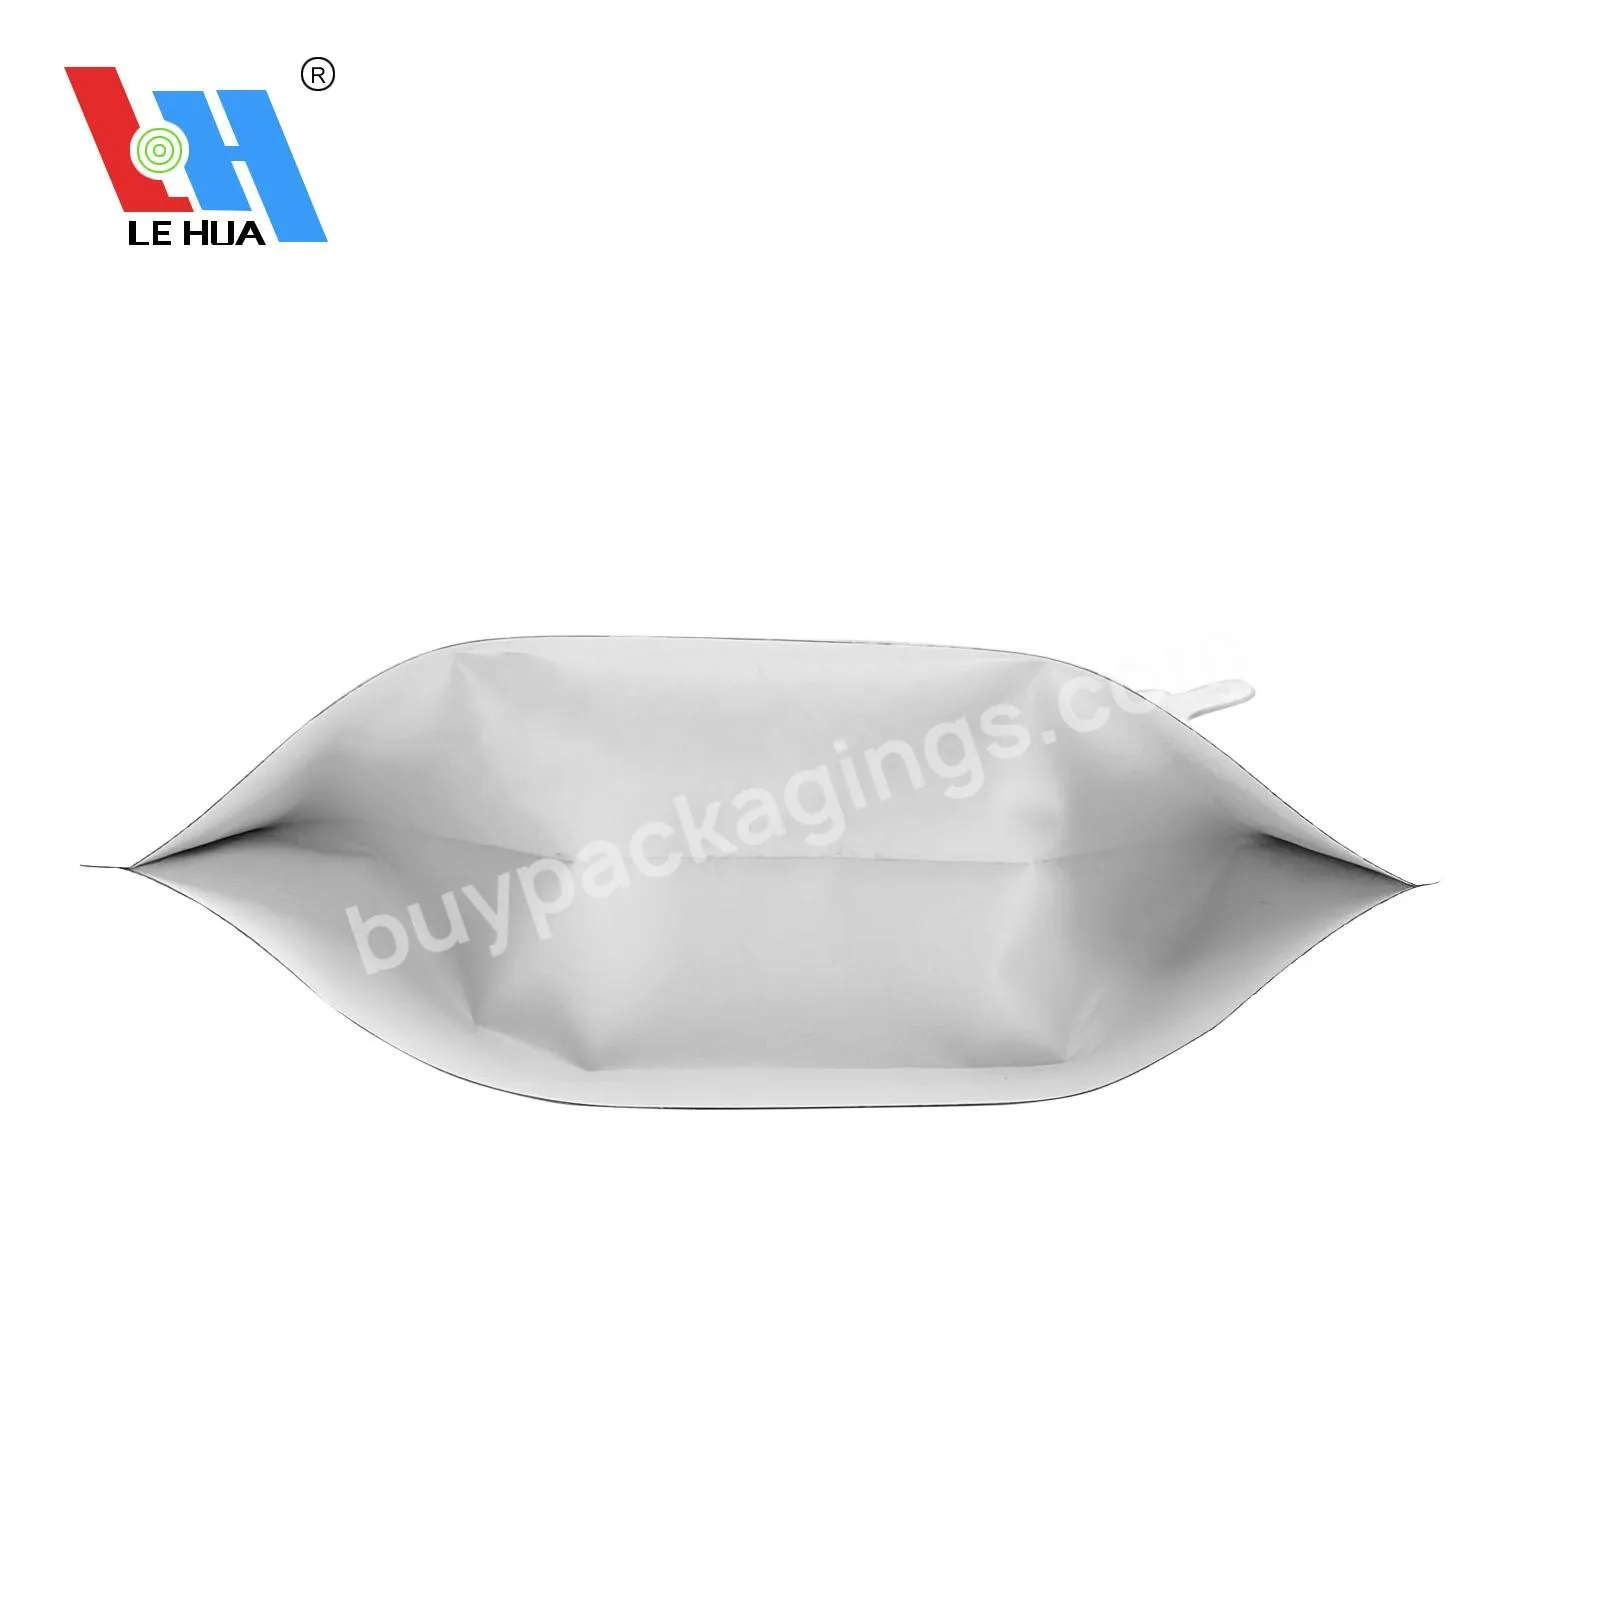 Customized High Quality Diamond-shaped Aluminium Foil Coffee Bag Packaging Stand Up Bag Coffee Bean Bag With Zipper - Buy Diamond-shaped Aluminium Foil Coffee Bag,Stand Up Bag Coffee Bean Bag,Coffee Bag Packaging Stand Up Bag.